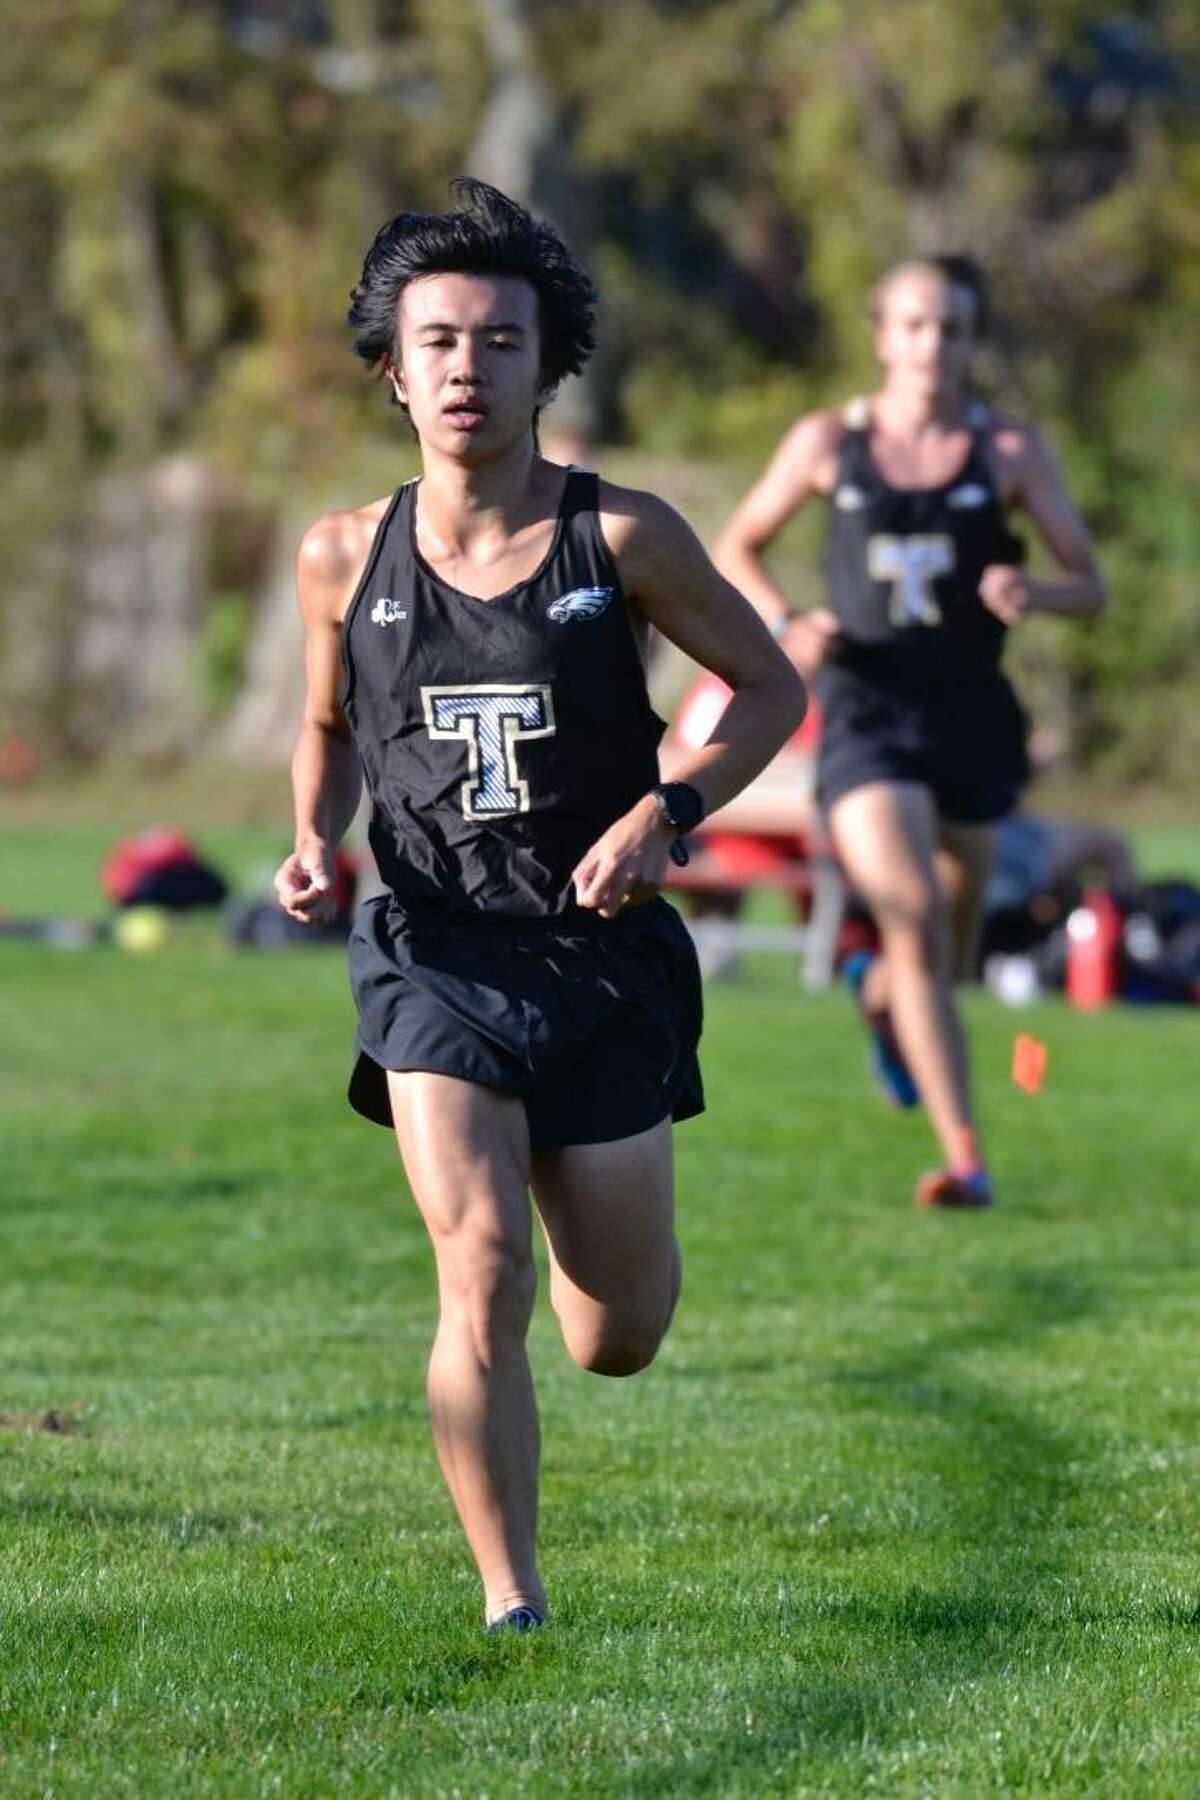 Bronson Ho's time of 15:24 on his home course is the 3rd best ever for an Eagle.